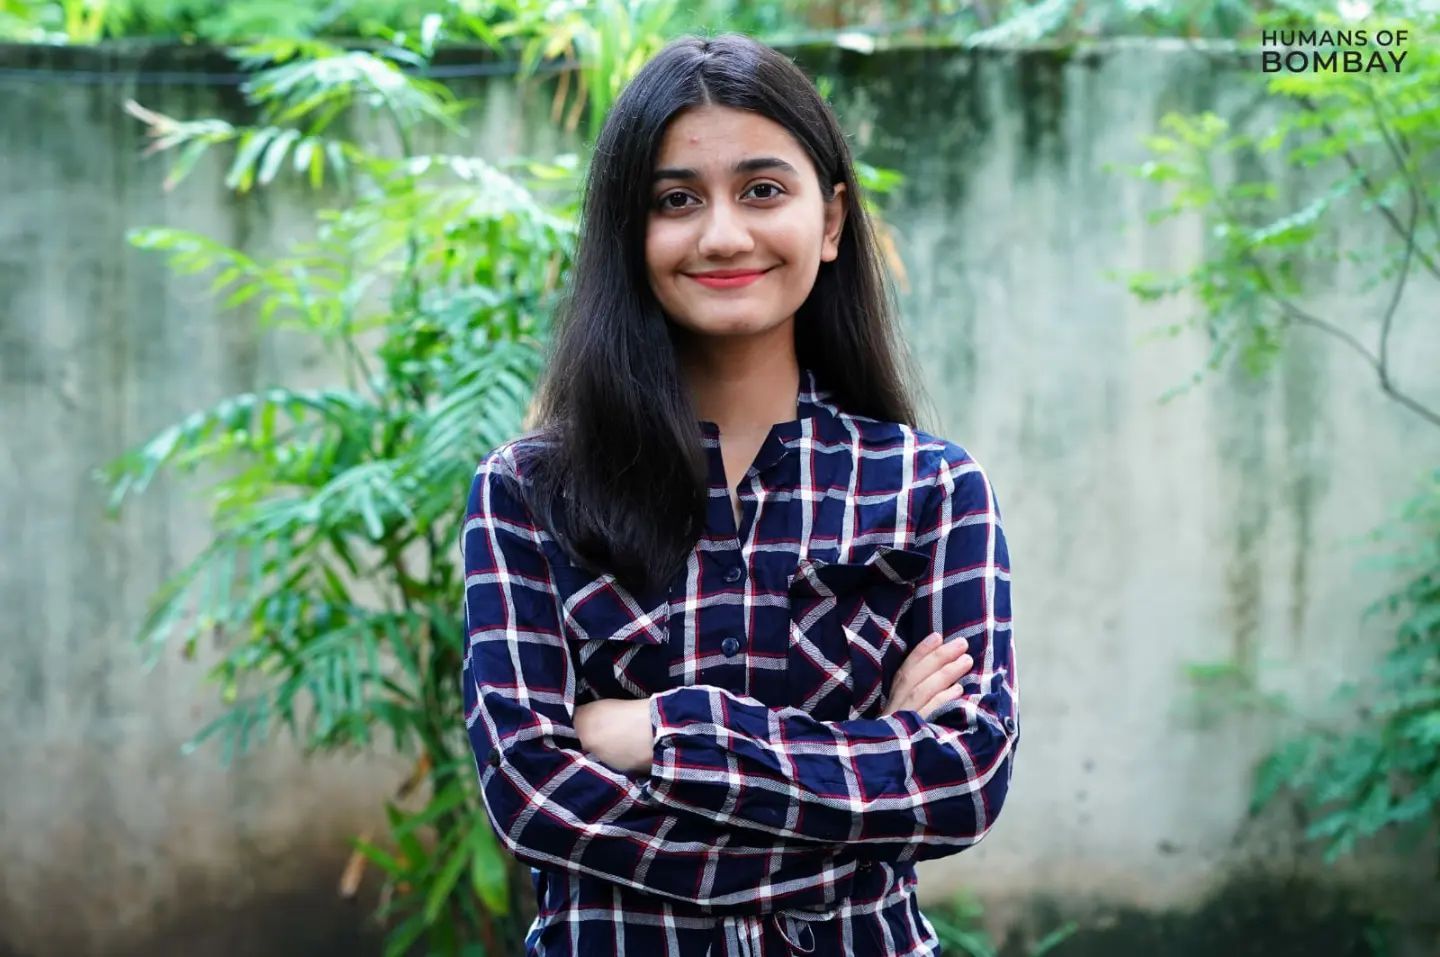 Muskaan Bawa crowdfunding for Harvard? Know all about Humans of Bombay post controversy